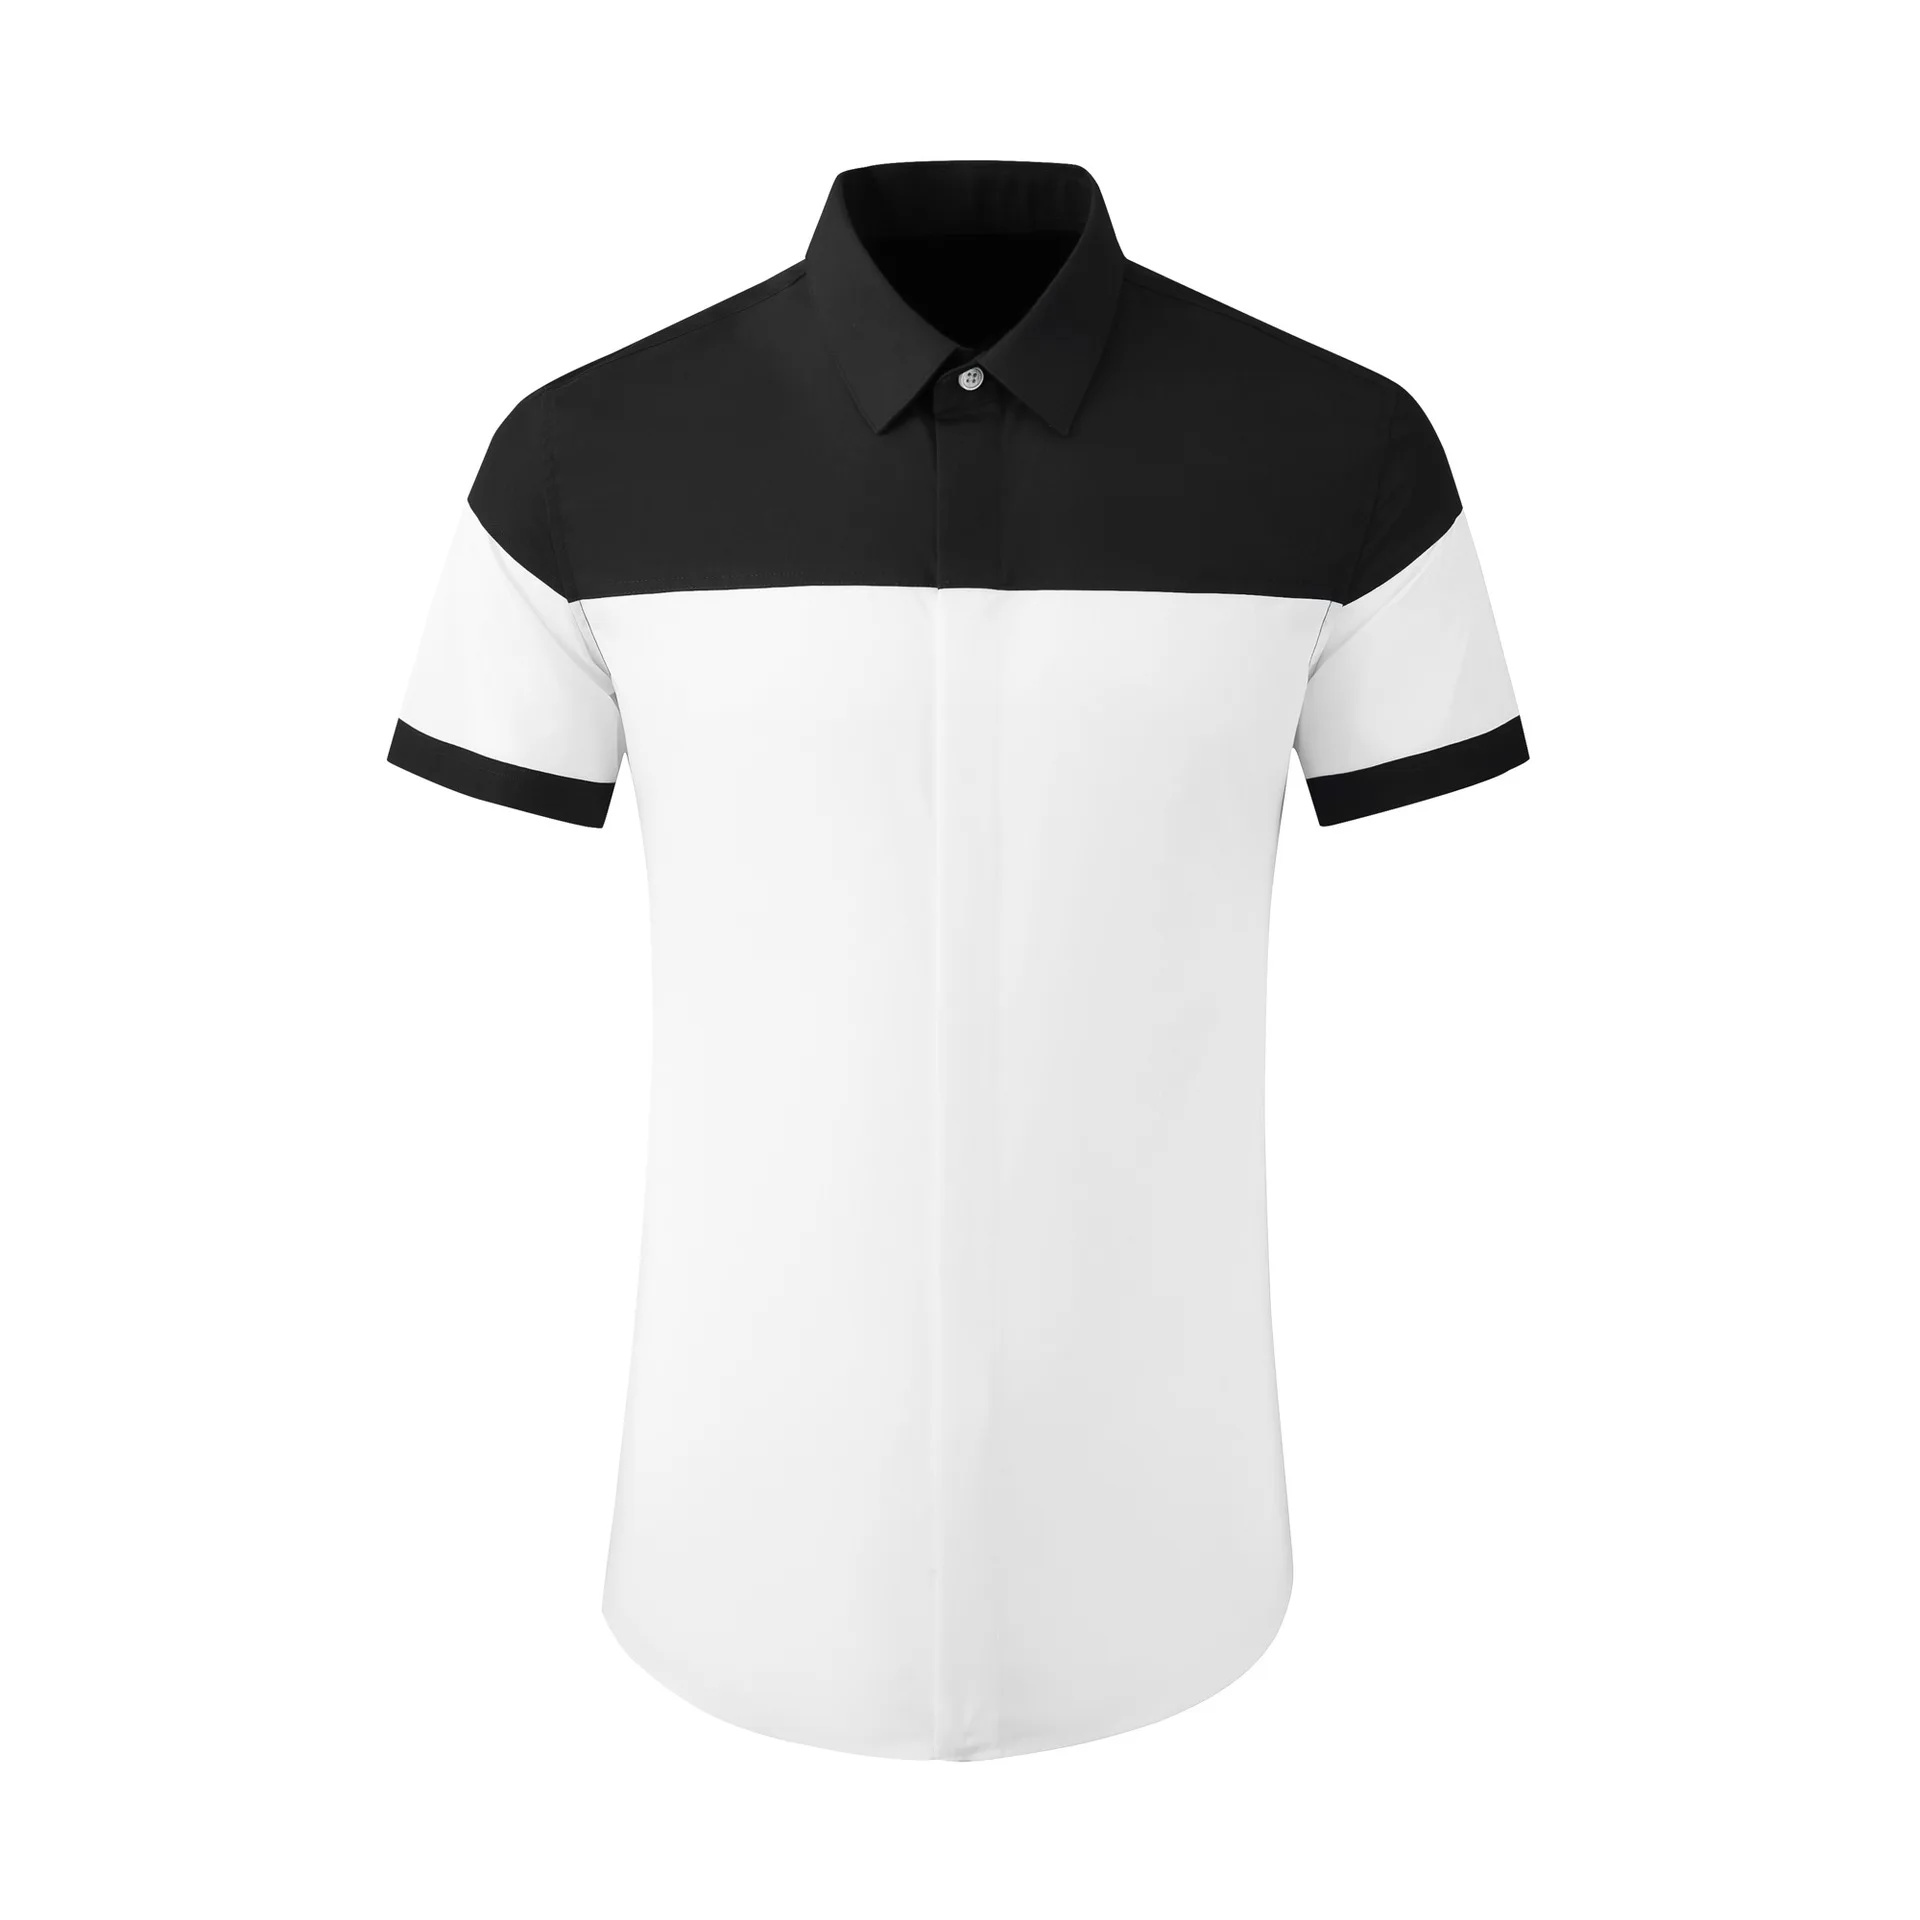 High Quality Luxury Jewelry Fashion  Printed Design New Arrival Men Polo Shirts 100%Cotton Block Two Color Men'S Shirgood